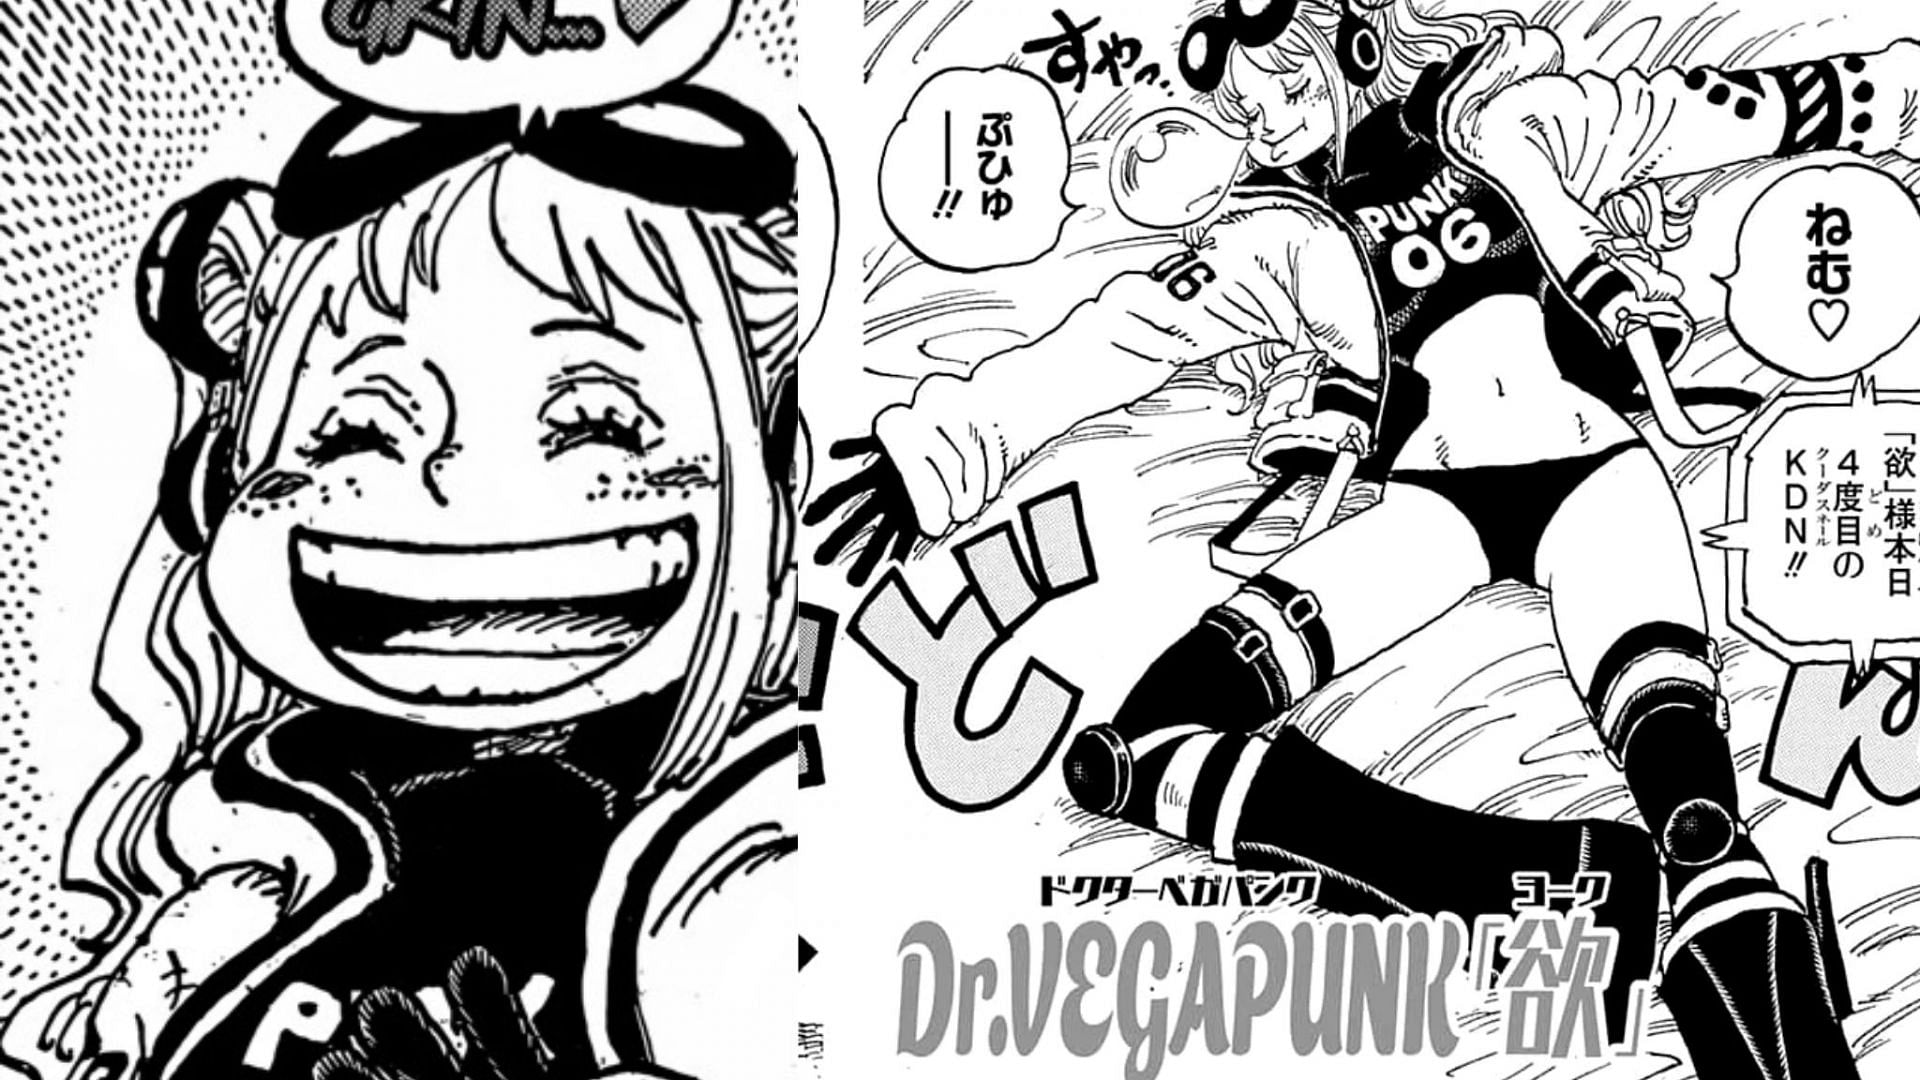 Spoiler - One Piece Chapter 1061 Spoilers Summaries and Images